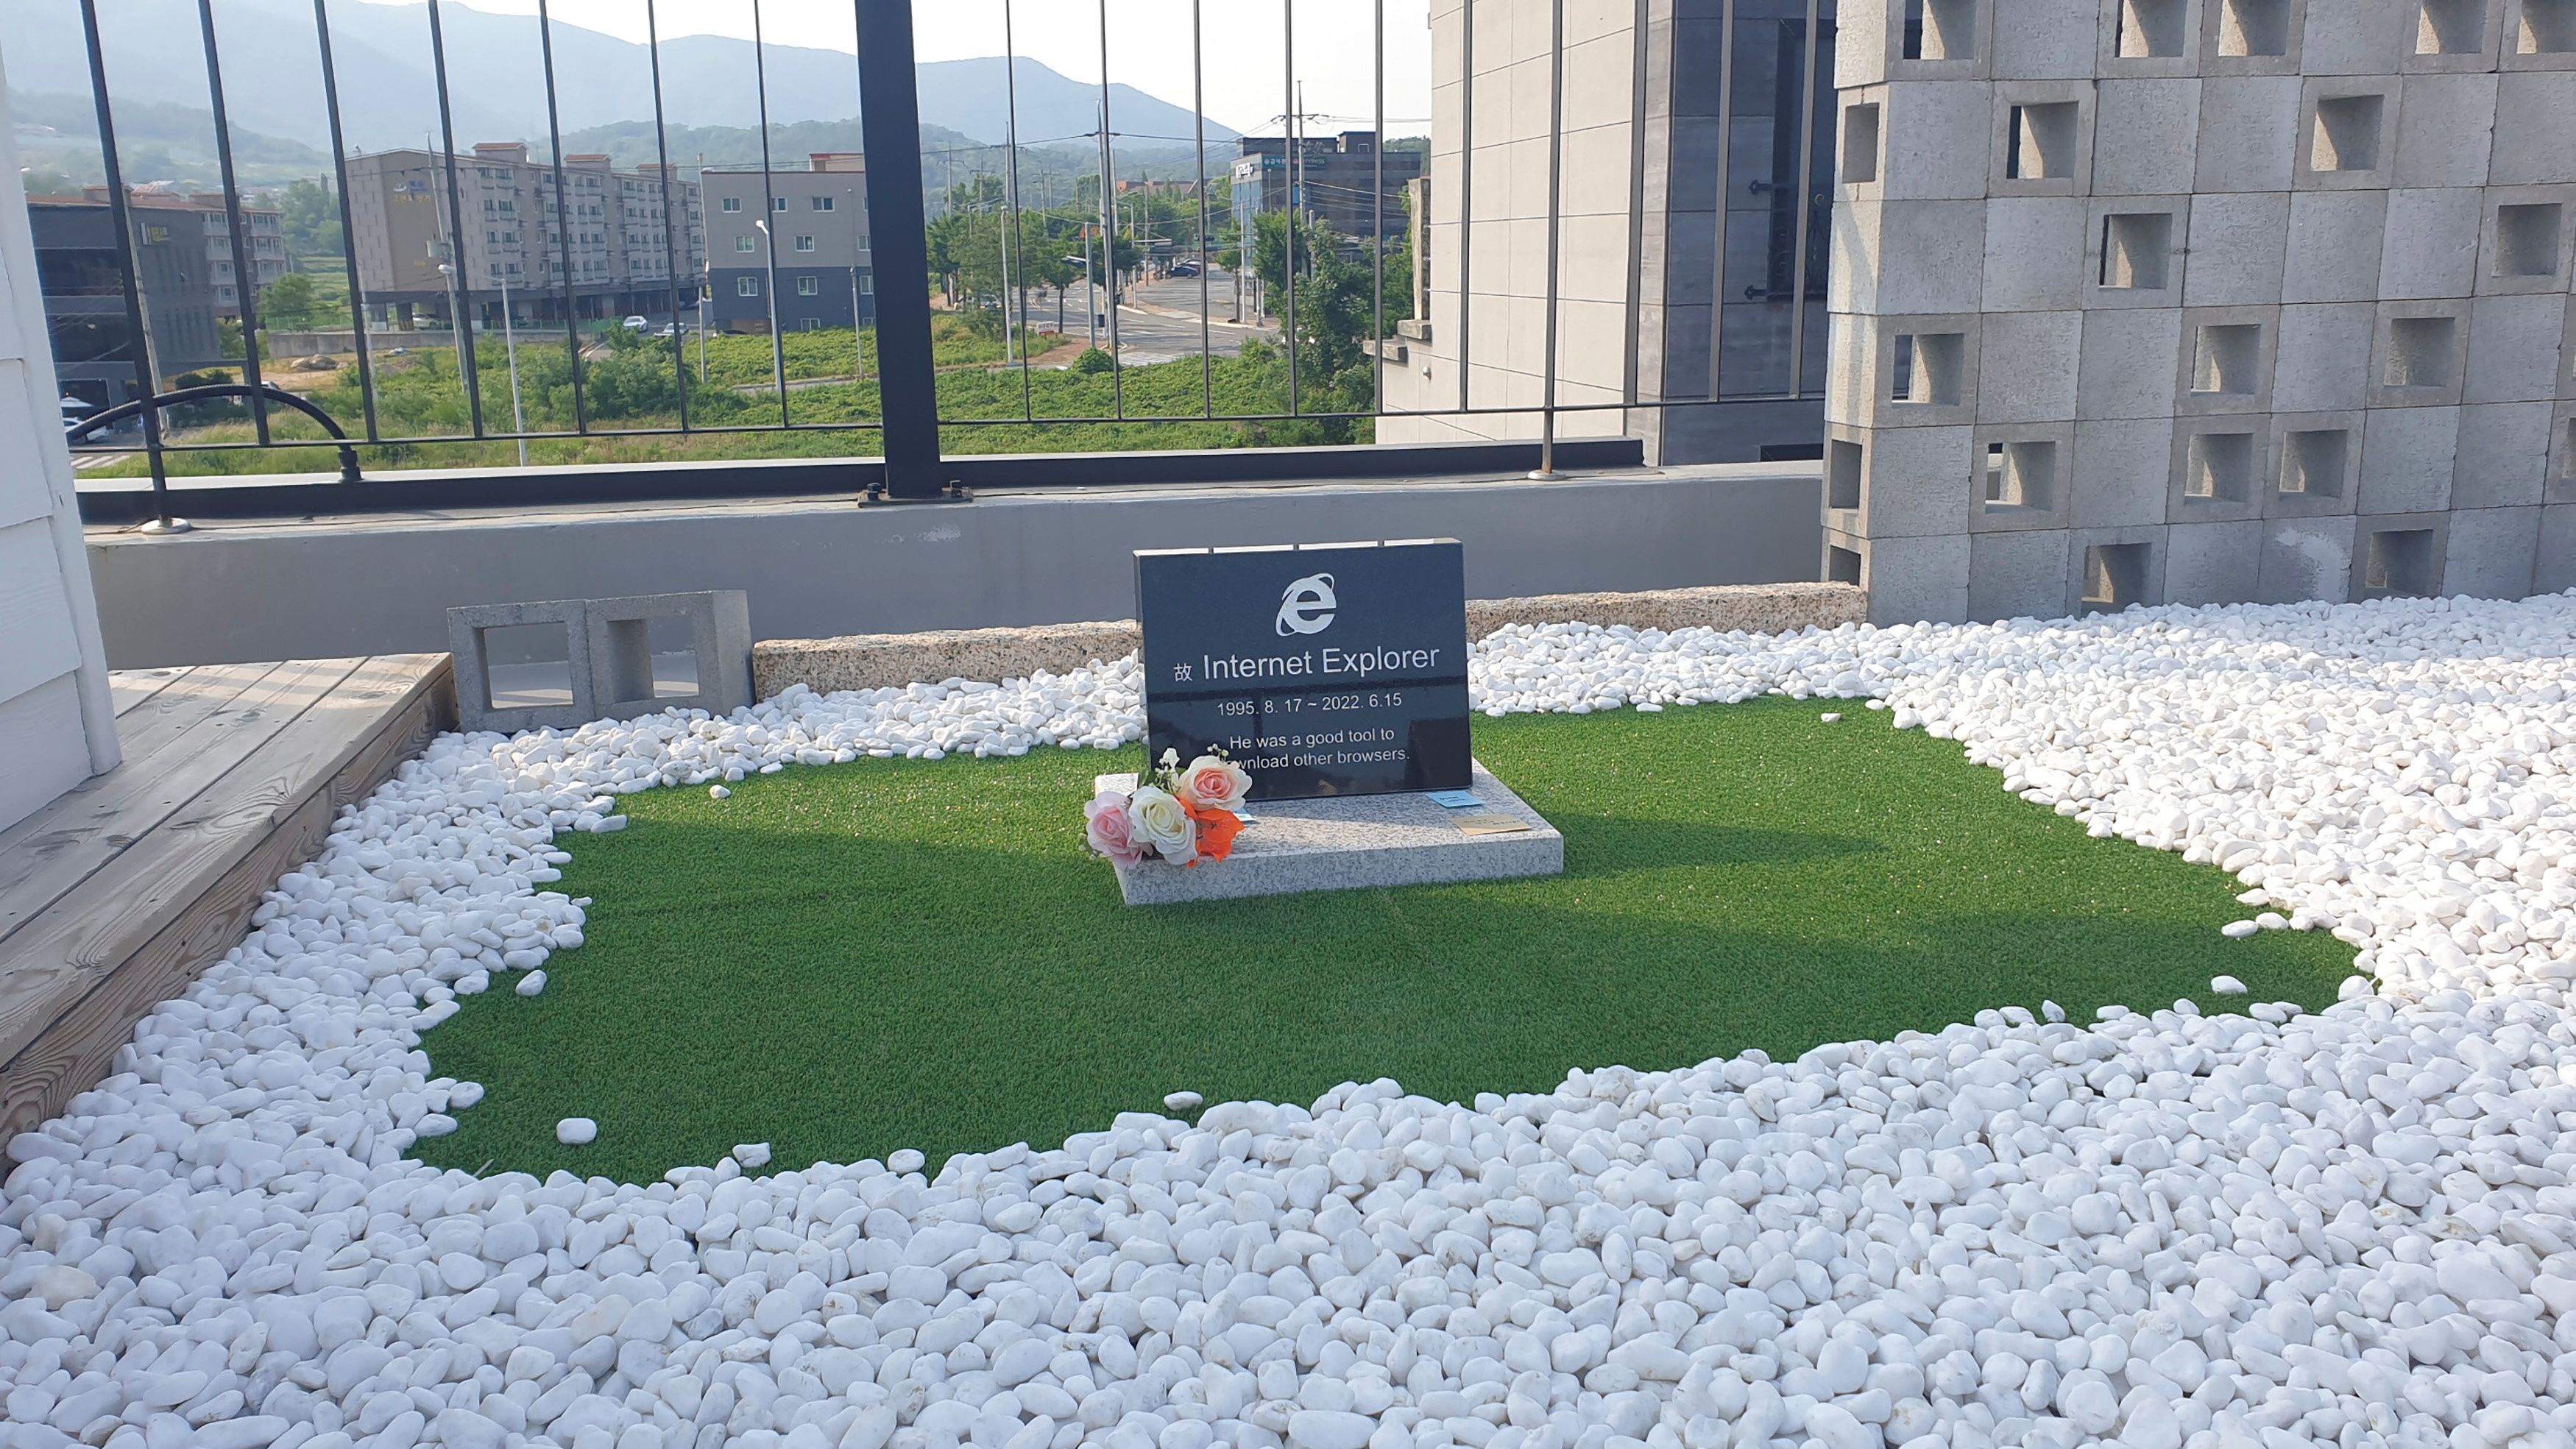 Tombstone of Internet Explorer browser, set up by South Korea's software engineer Jung Ki-young in Gyeongju